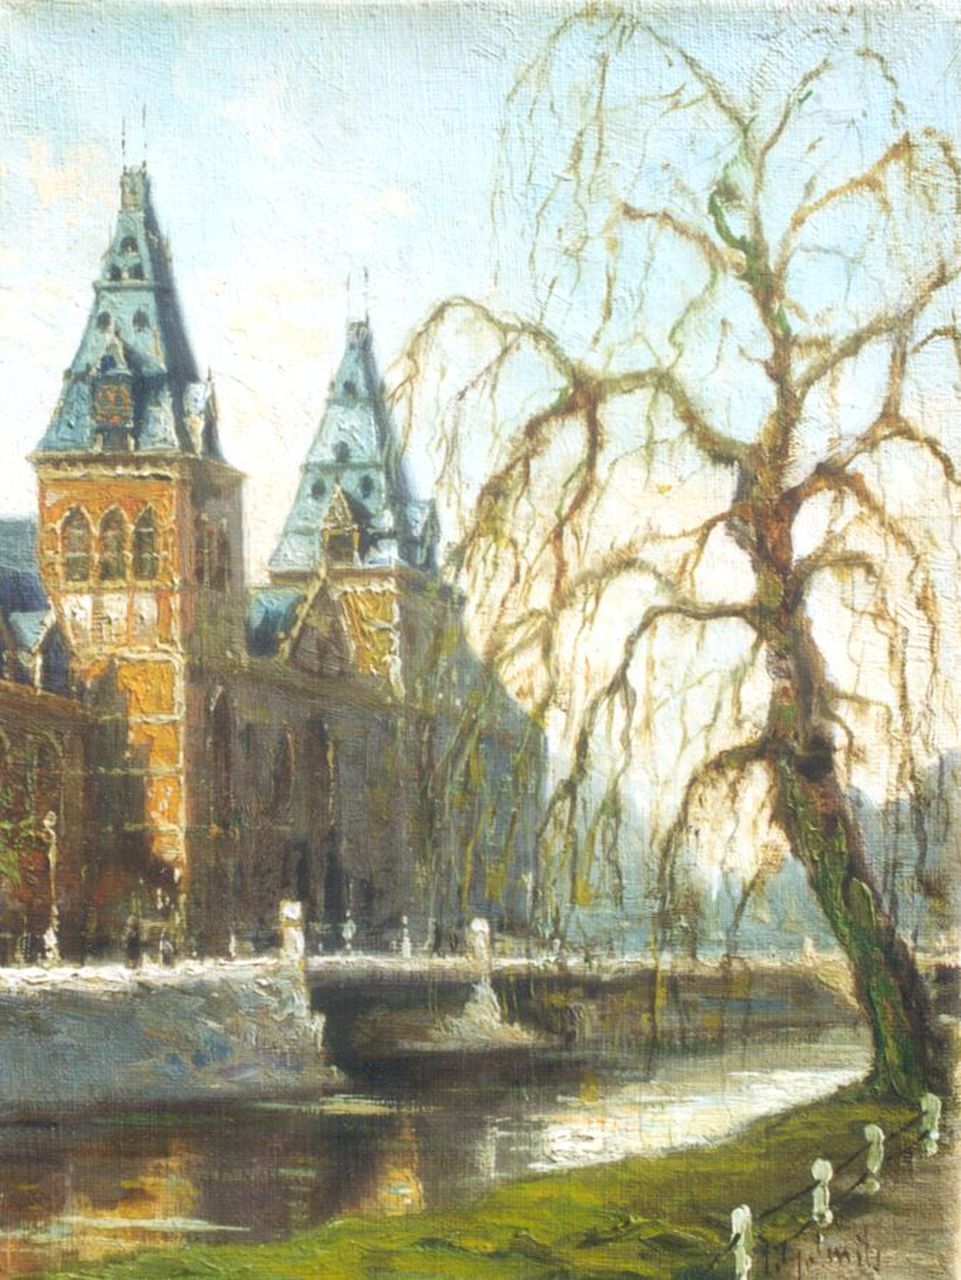 Smits J.G.  | Jan Gerard Smits, A view of the Rijksmuseum, Amsterdam, oil on canvas 24.5 x 18.3 cm, signed l.r.